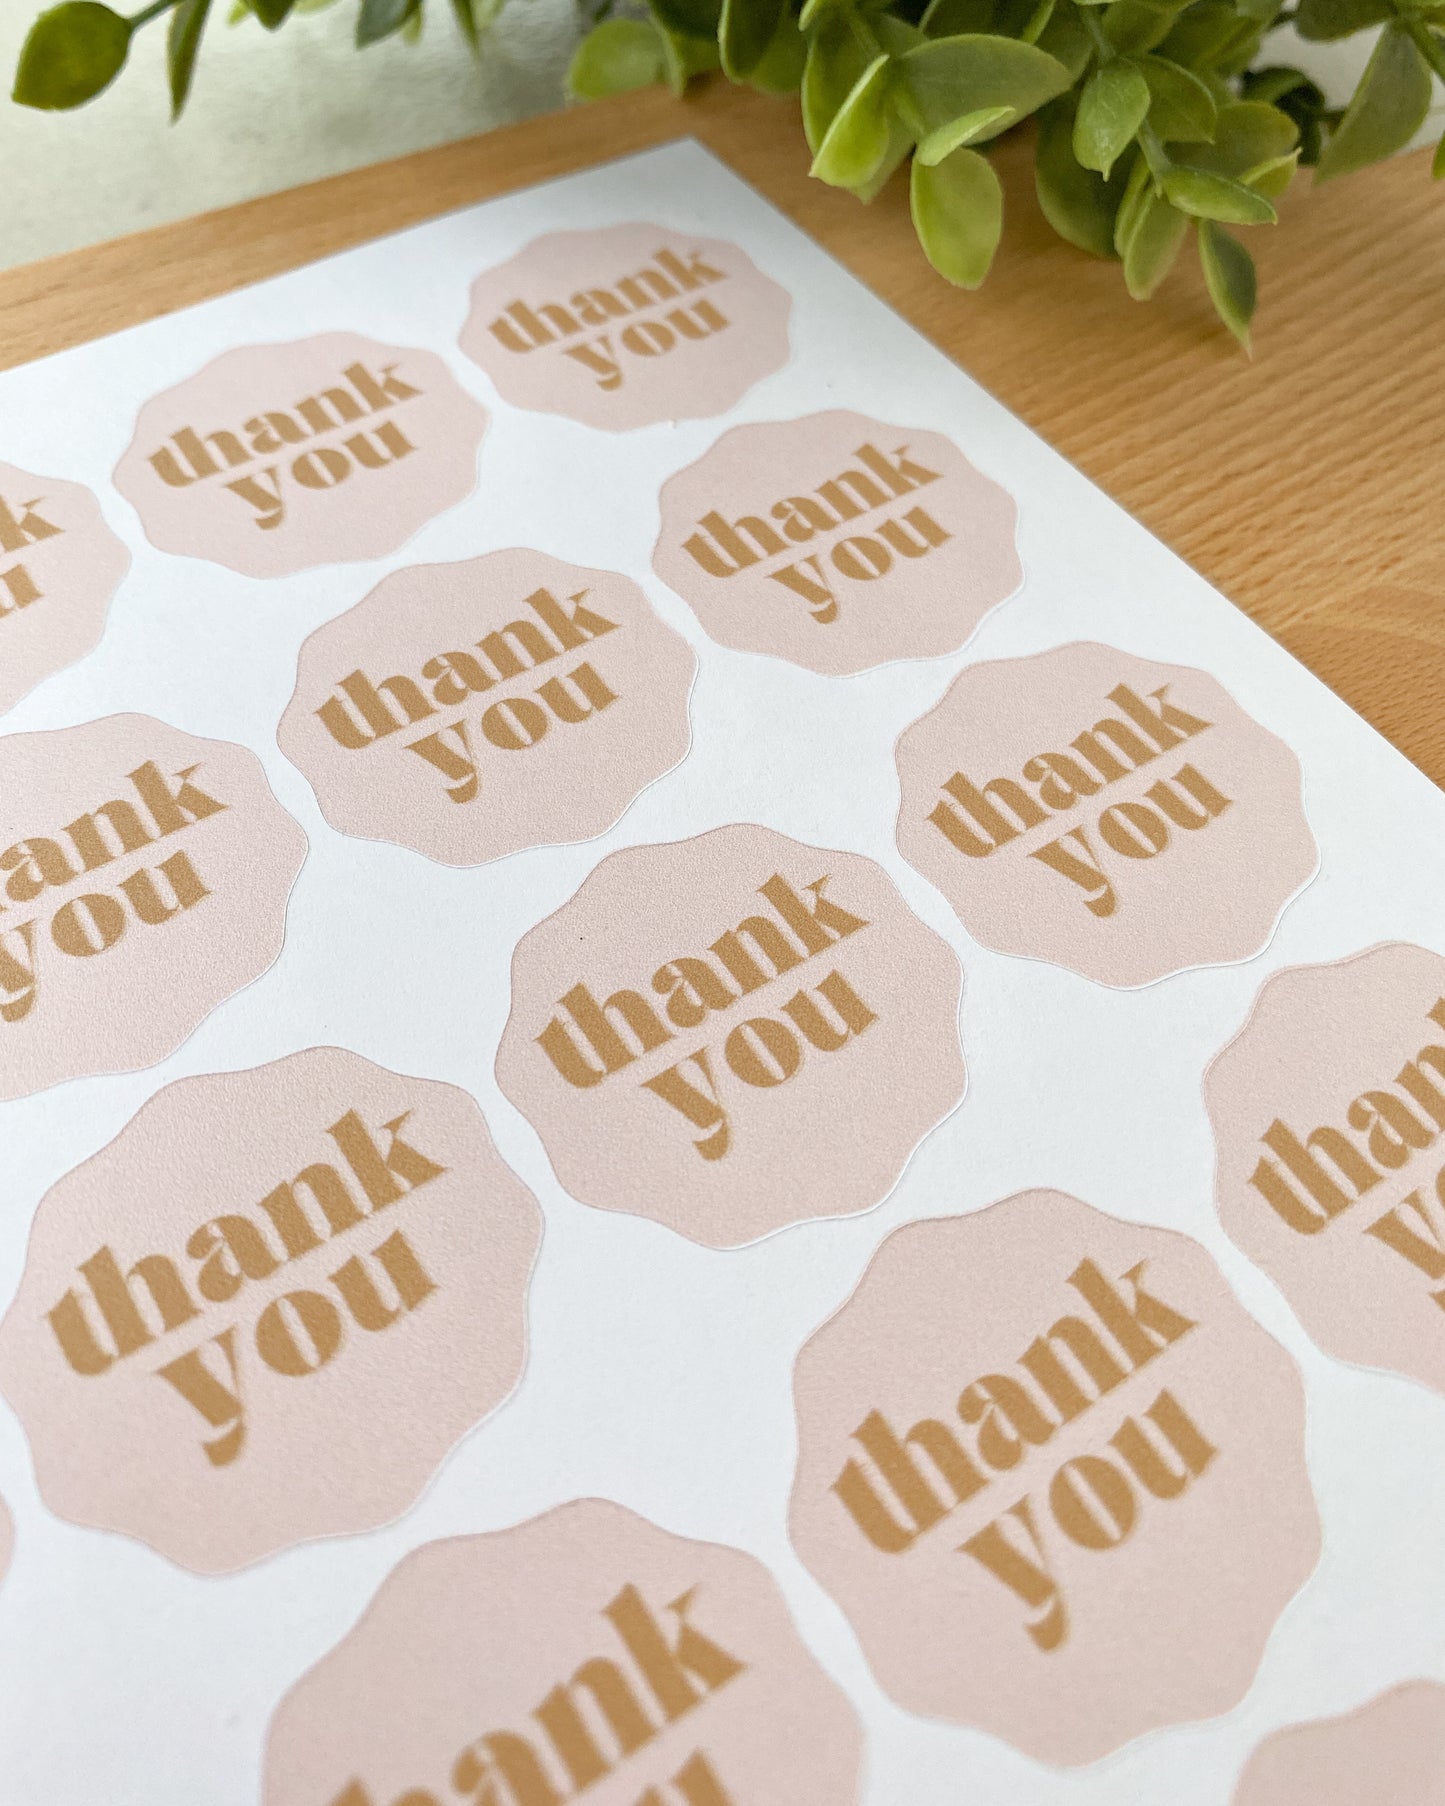 Thank You Packaging Sticker Sheets